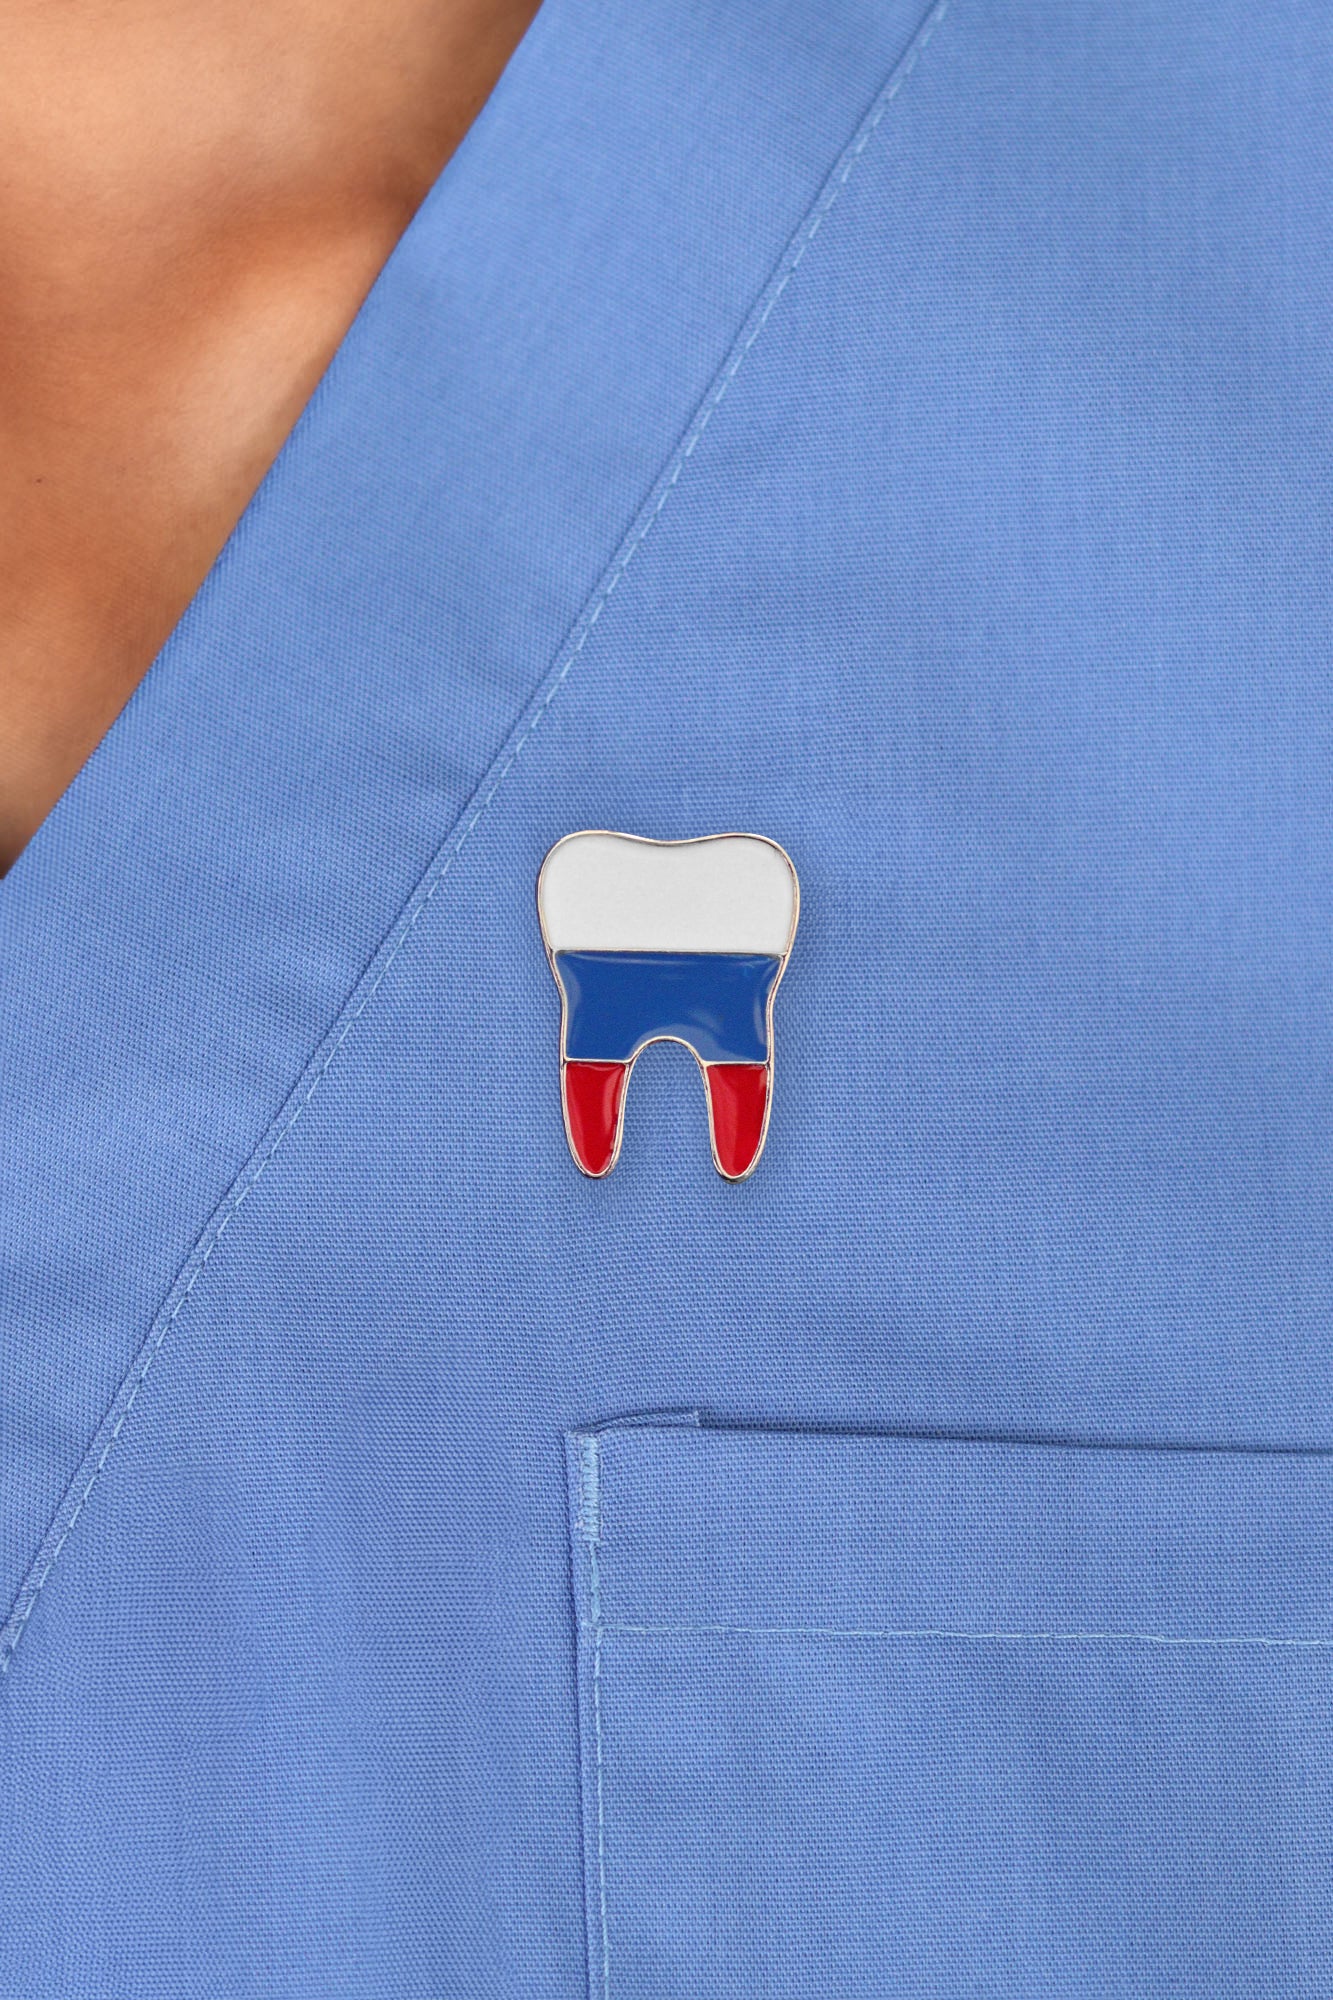 Russia Tooth Pin